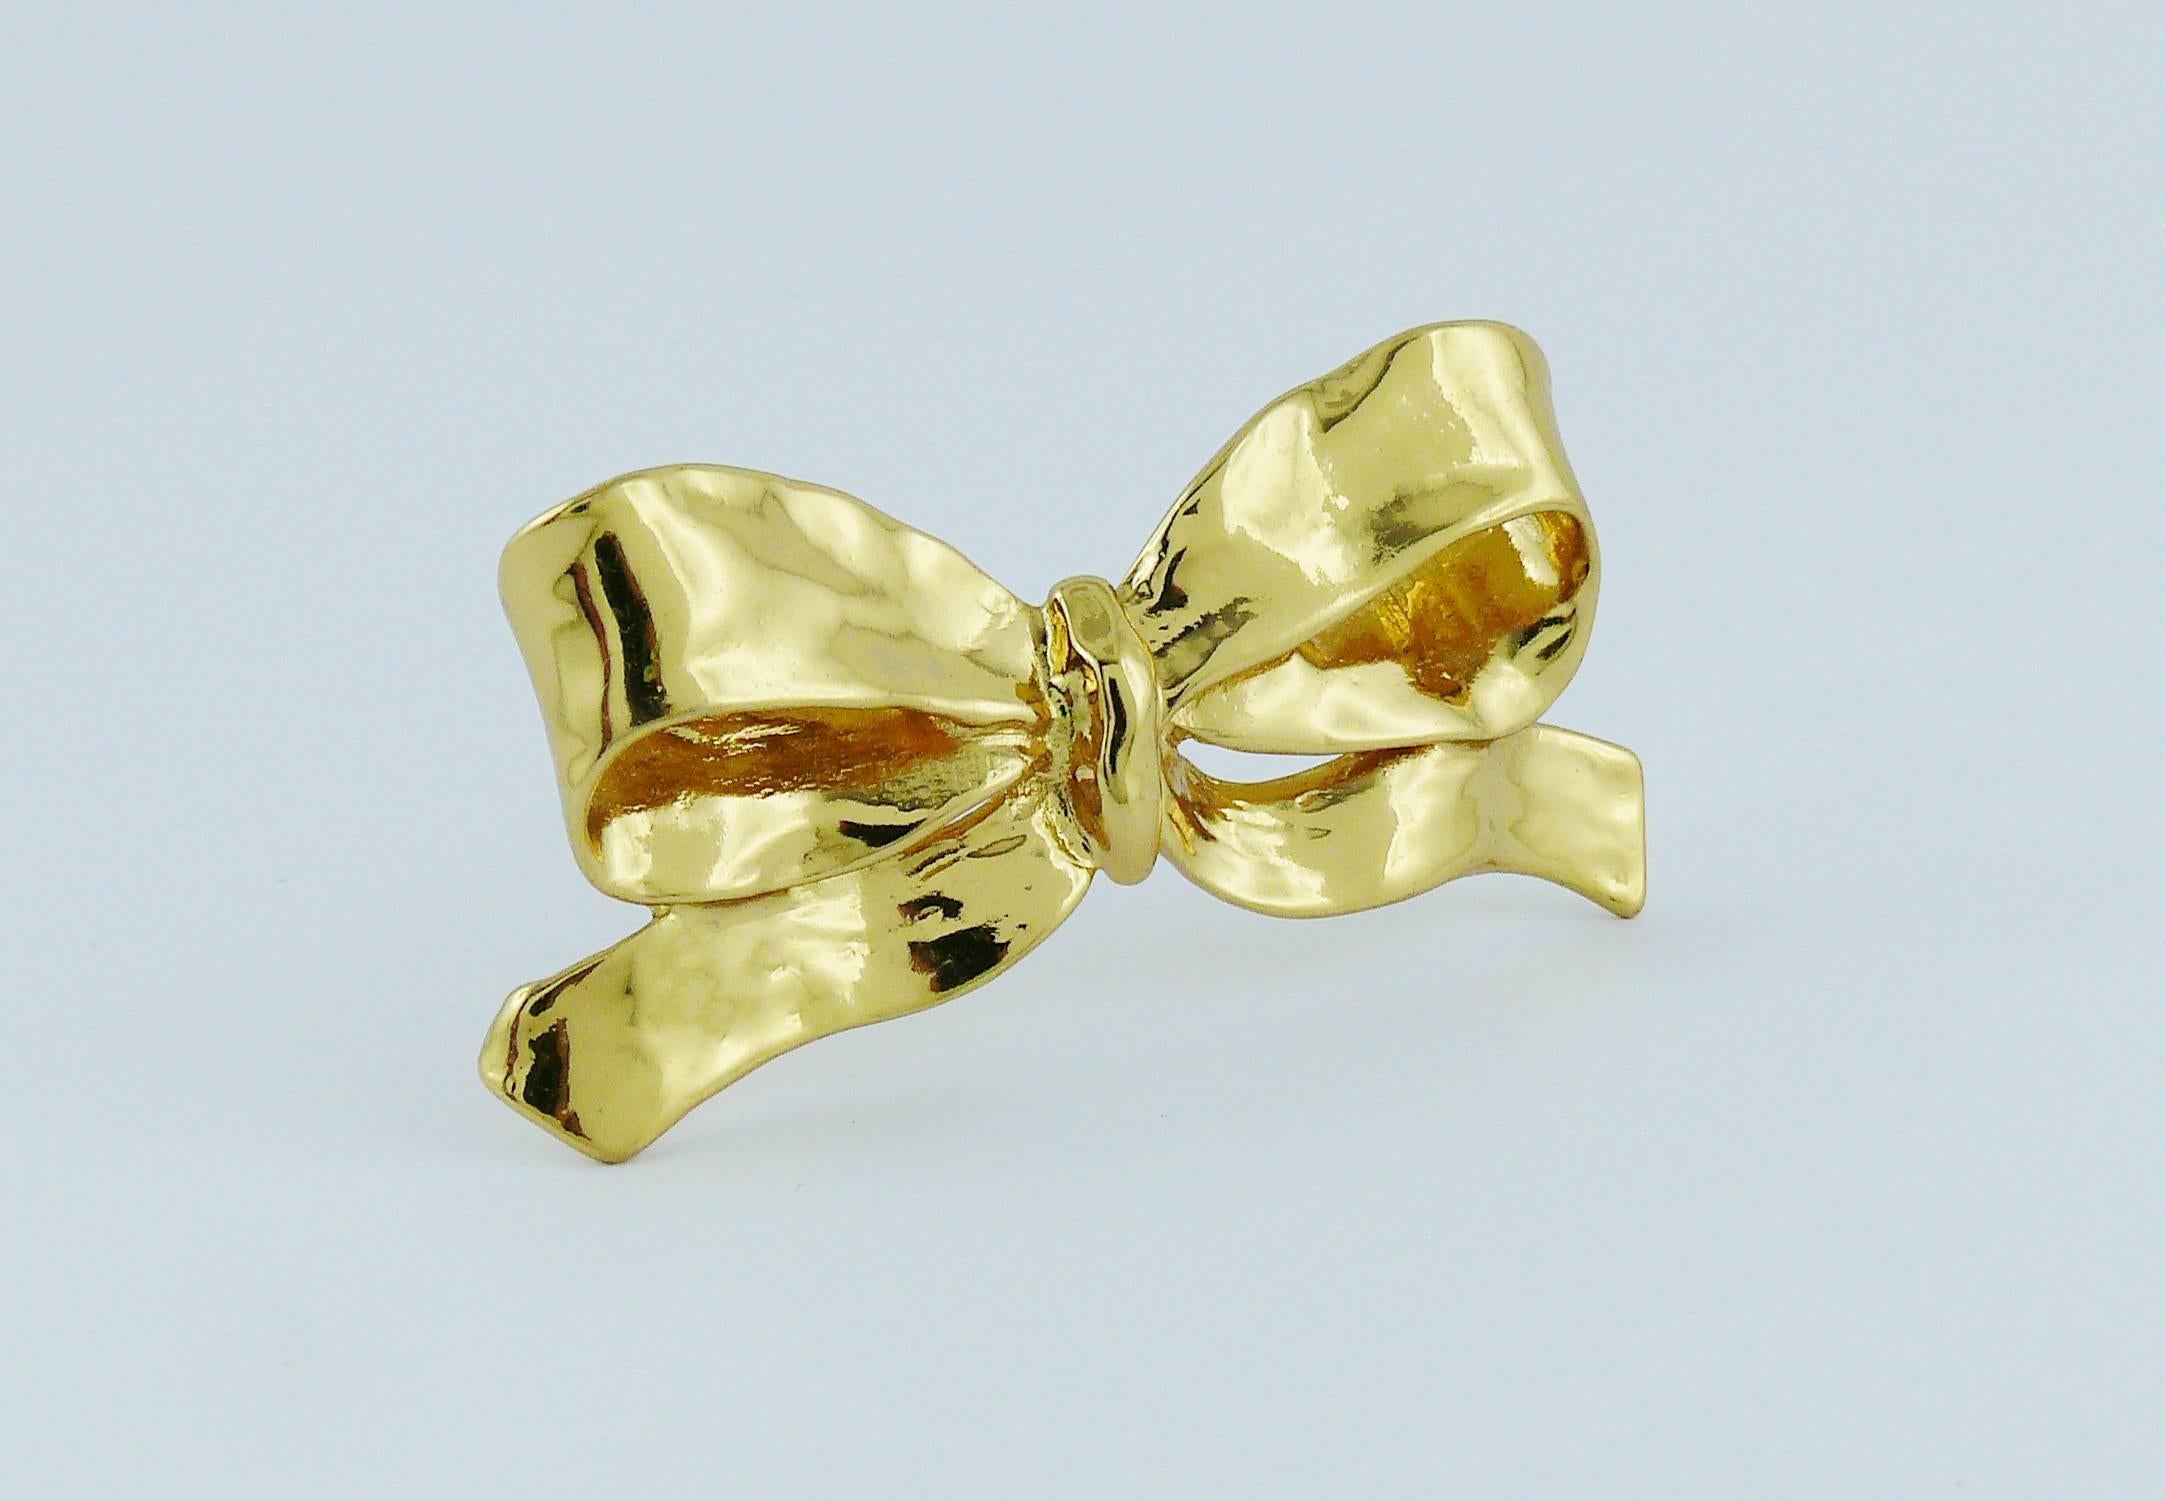 YVES SAINT LAURENT vintage gold toned bow brooch featuring hammered finish.

Embossed YSL Made in France.

Indicative measurements : max. height approx. 3 cm (1.18 inches) / max. length approx. 7.5 cm (2.95 inches).

JEWELRY CONDITION CHART
- New or